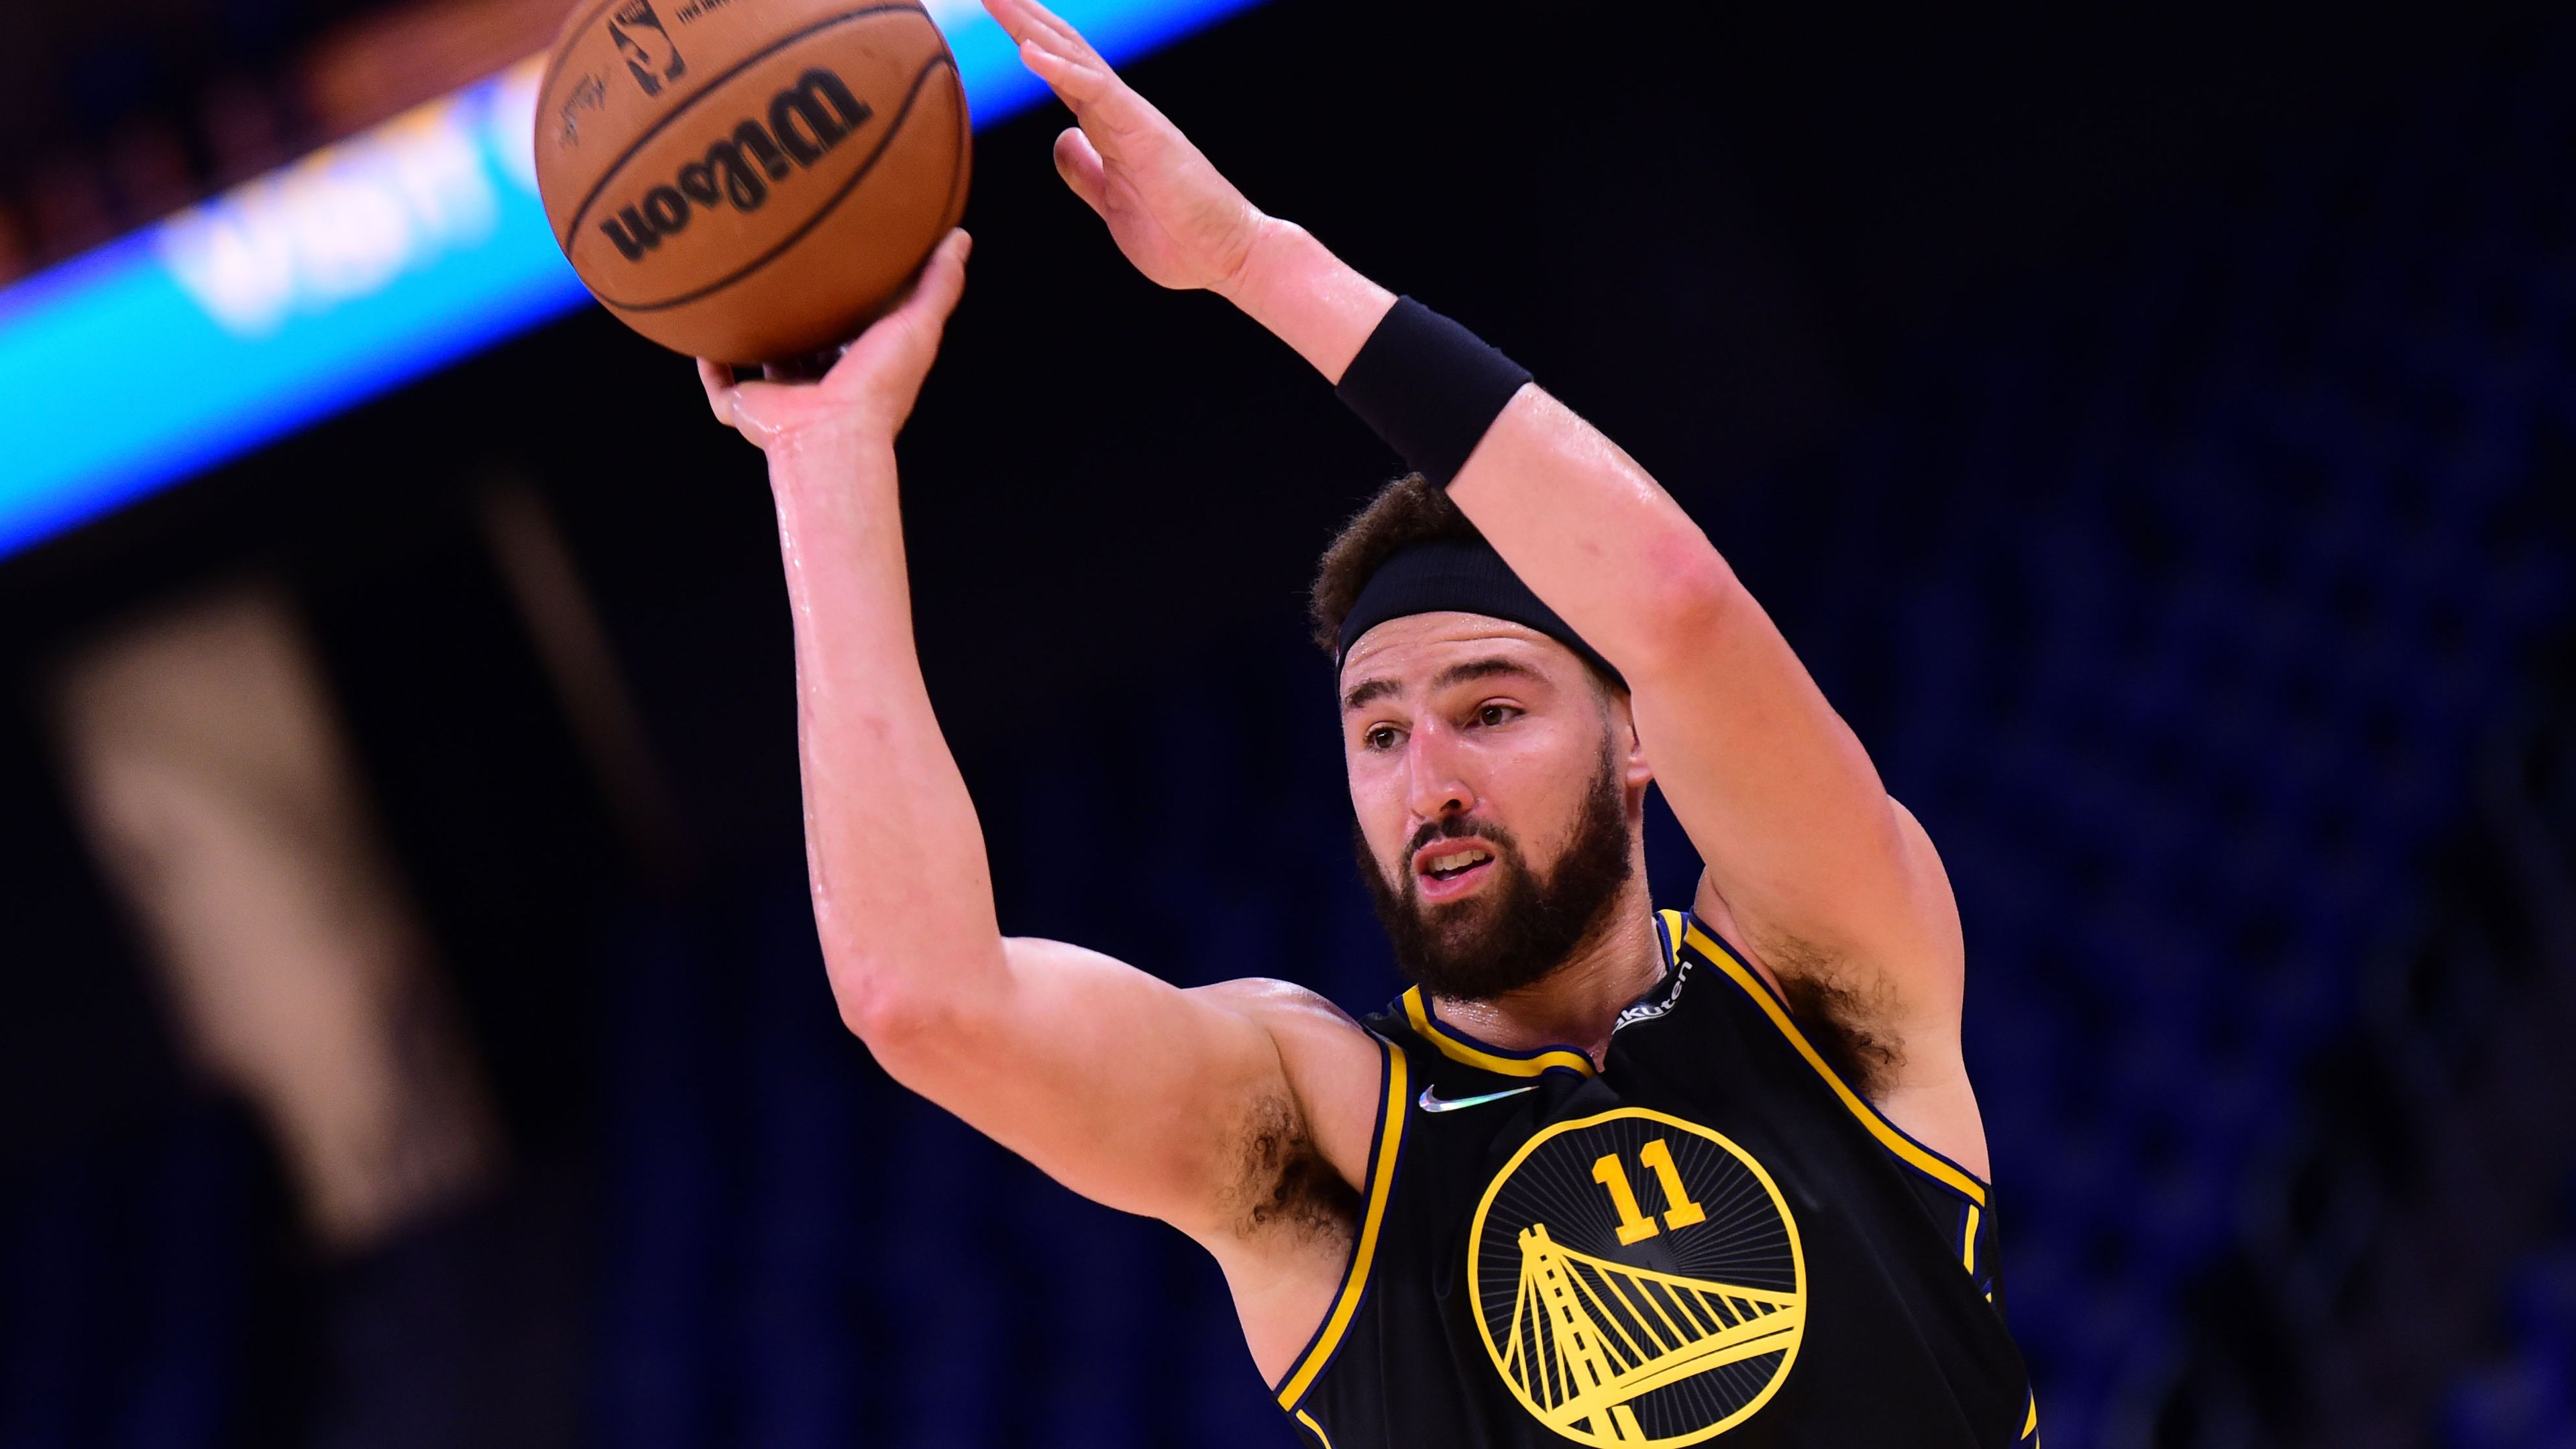 Klay Thompson of the Golden State Warriors warms up prior to the game against the Charlotte Hornets on November 3.